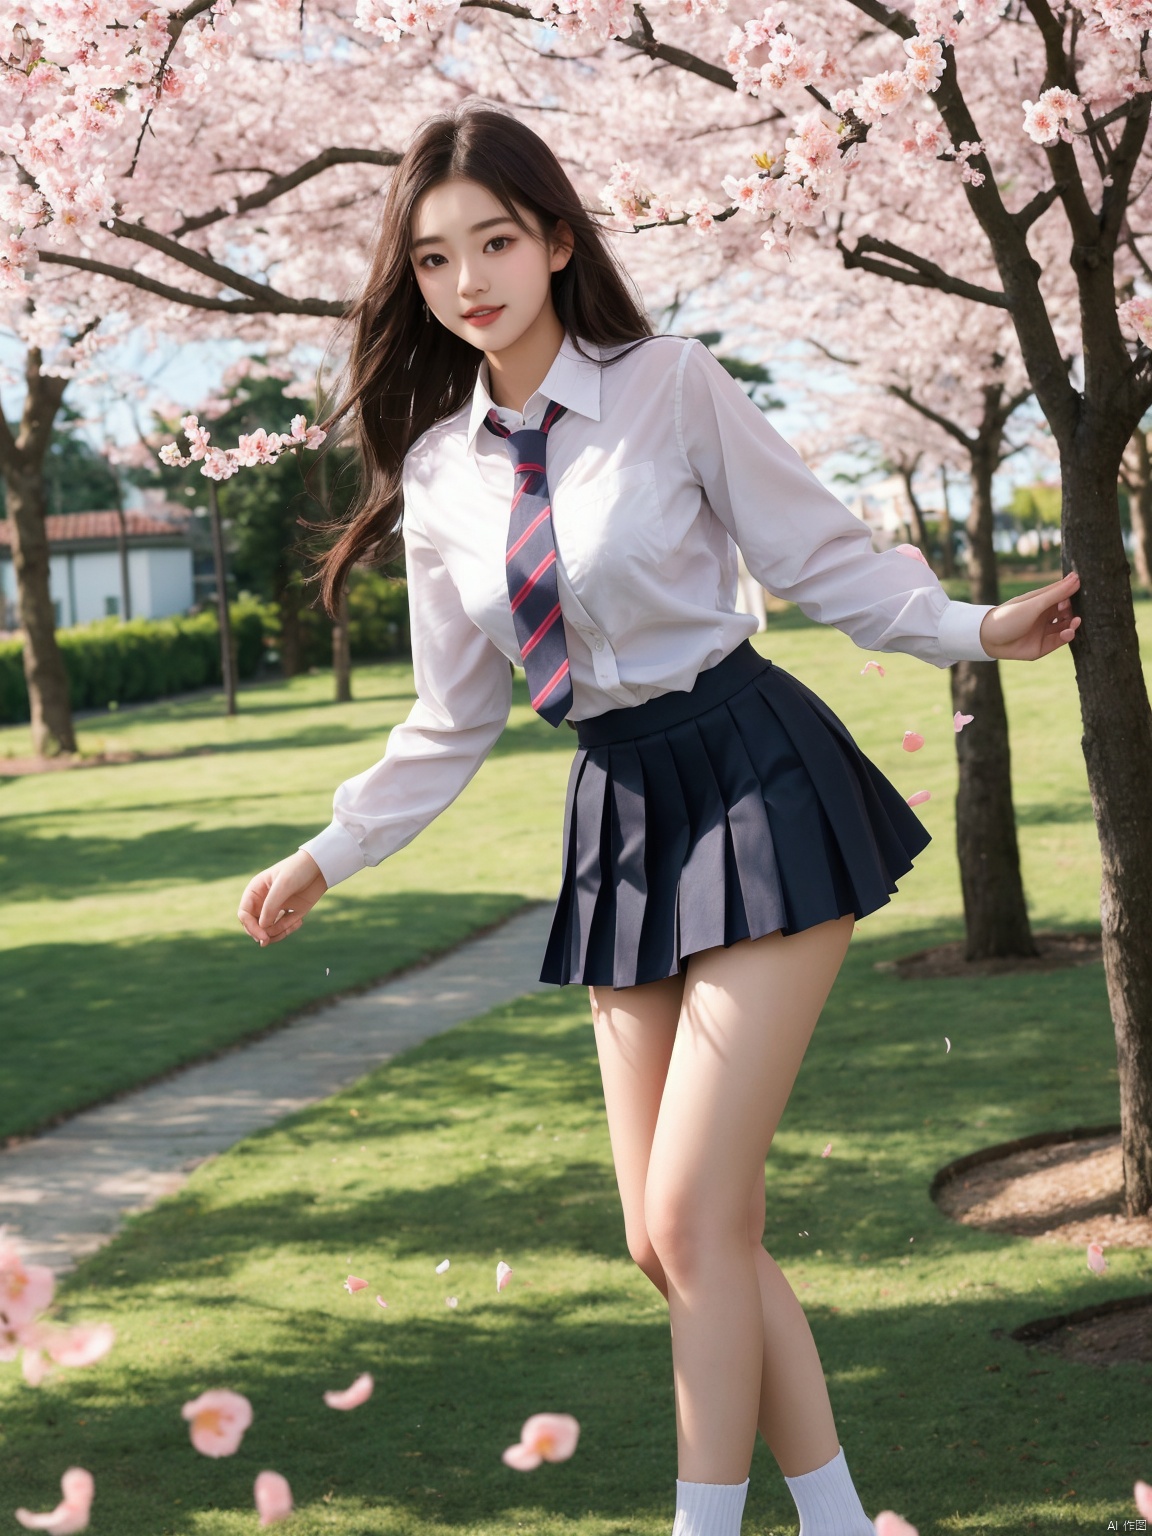  masterpiece,1 Girl,18 years old,Stand,Look at me,Lovely,Sweet,Wearing a school uniform,Students,Tie,Miniskirt,Outdoors,Aisle,Spring,Peach blossom,Flying petals,Long hair,textured skin,super detail,best quality,